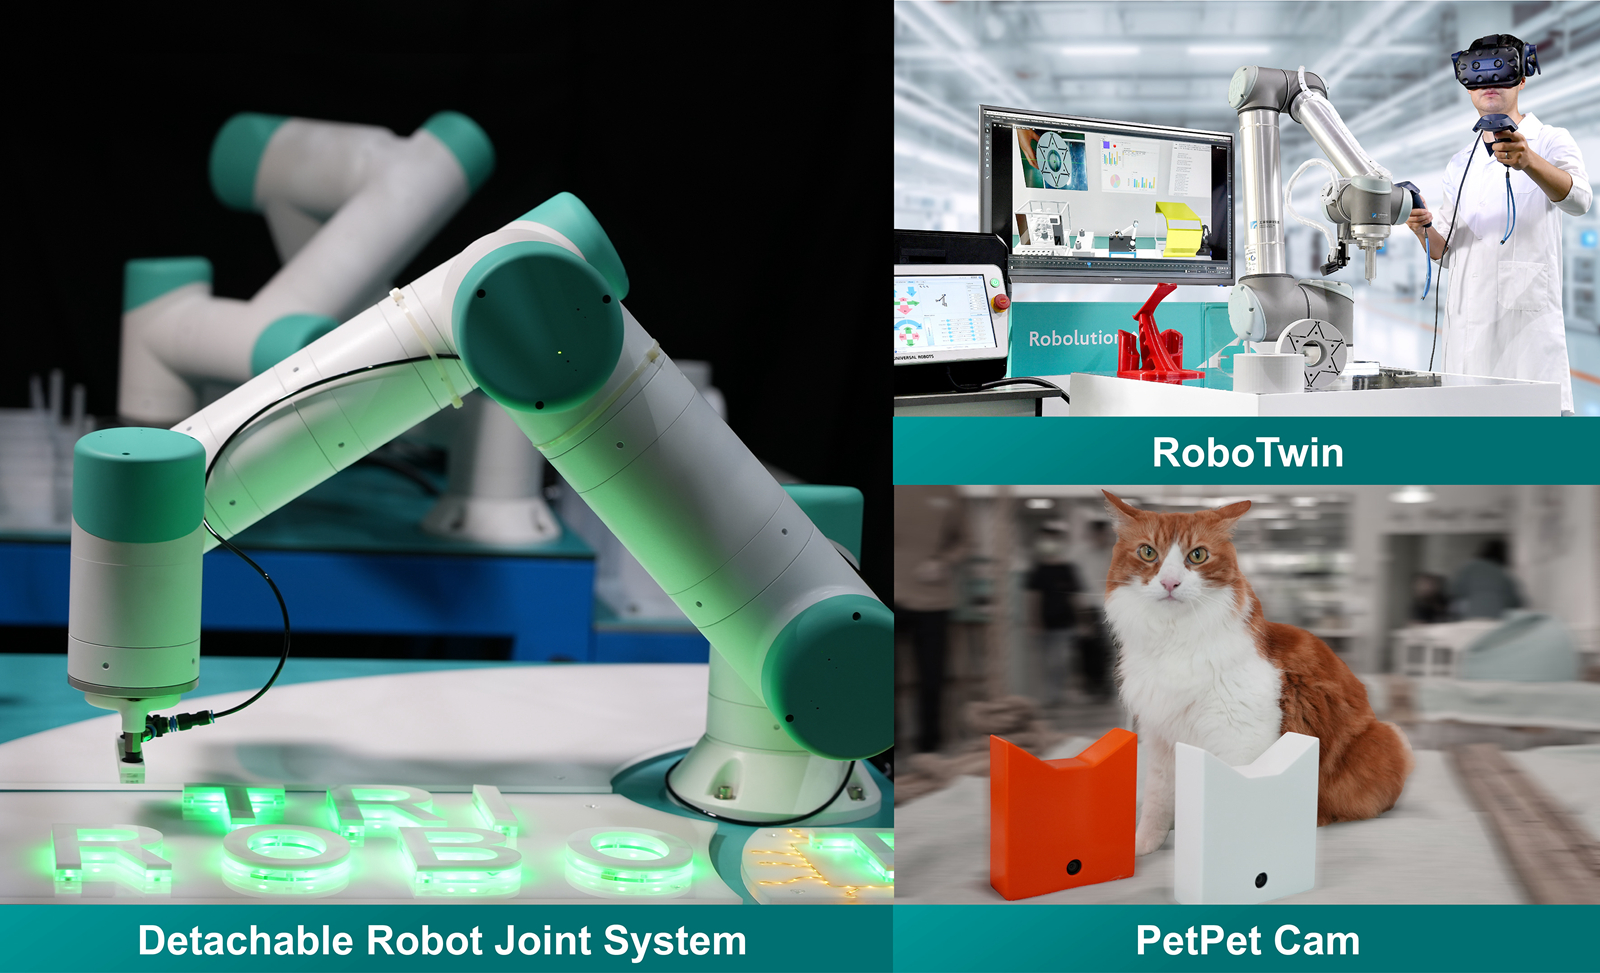 ITRI’s CES 2024 AI display, entertainment, and robotics innovations include PetPet Cam, RoboTwin, the Detachable Joint Robot System, and more.